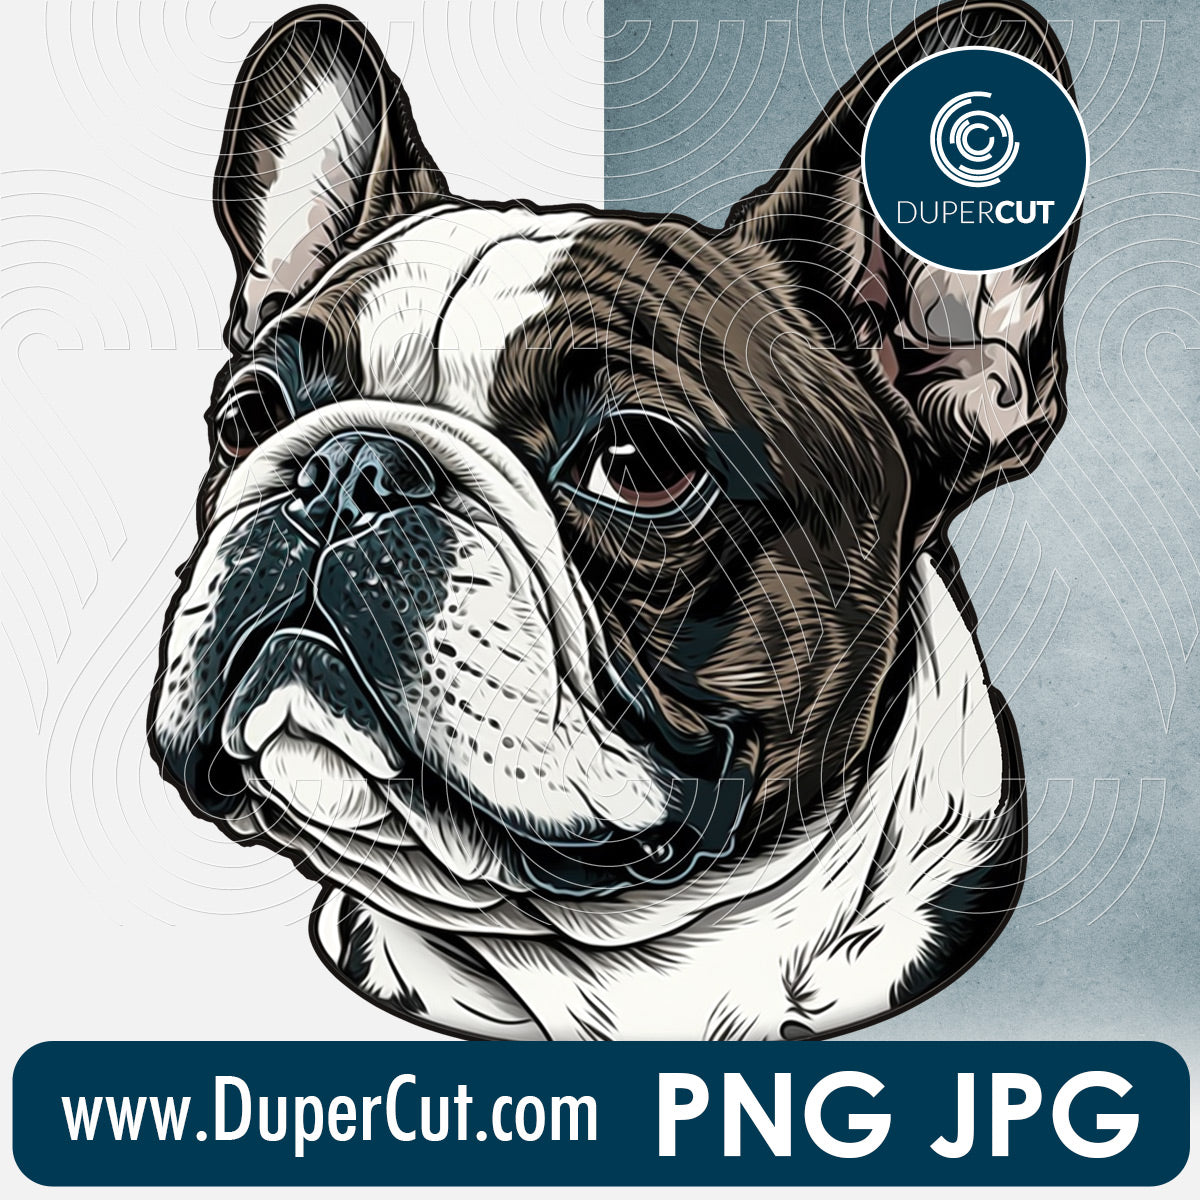 Black and white French Bulldog dog breed high resolution template - JPG PNG sublimation files transparent background by www.DuperCut.com